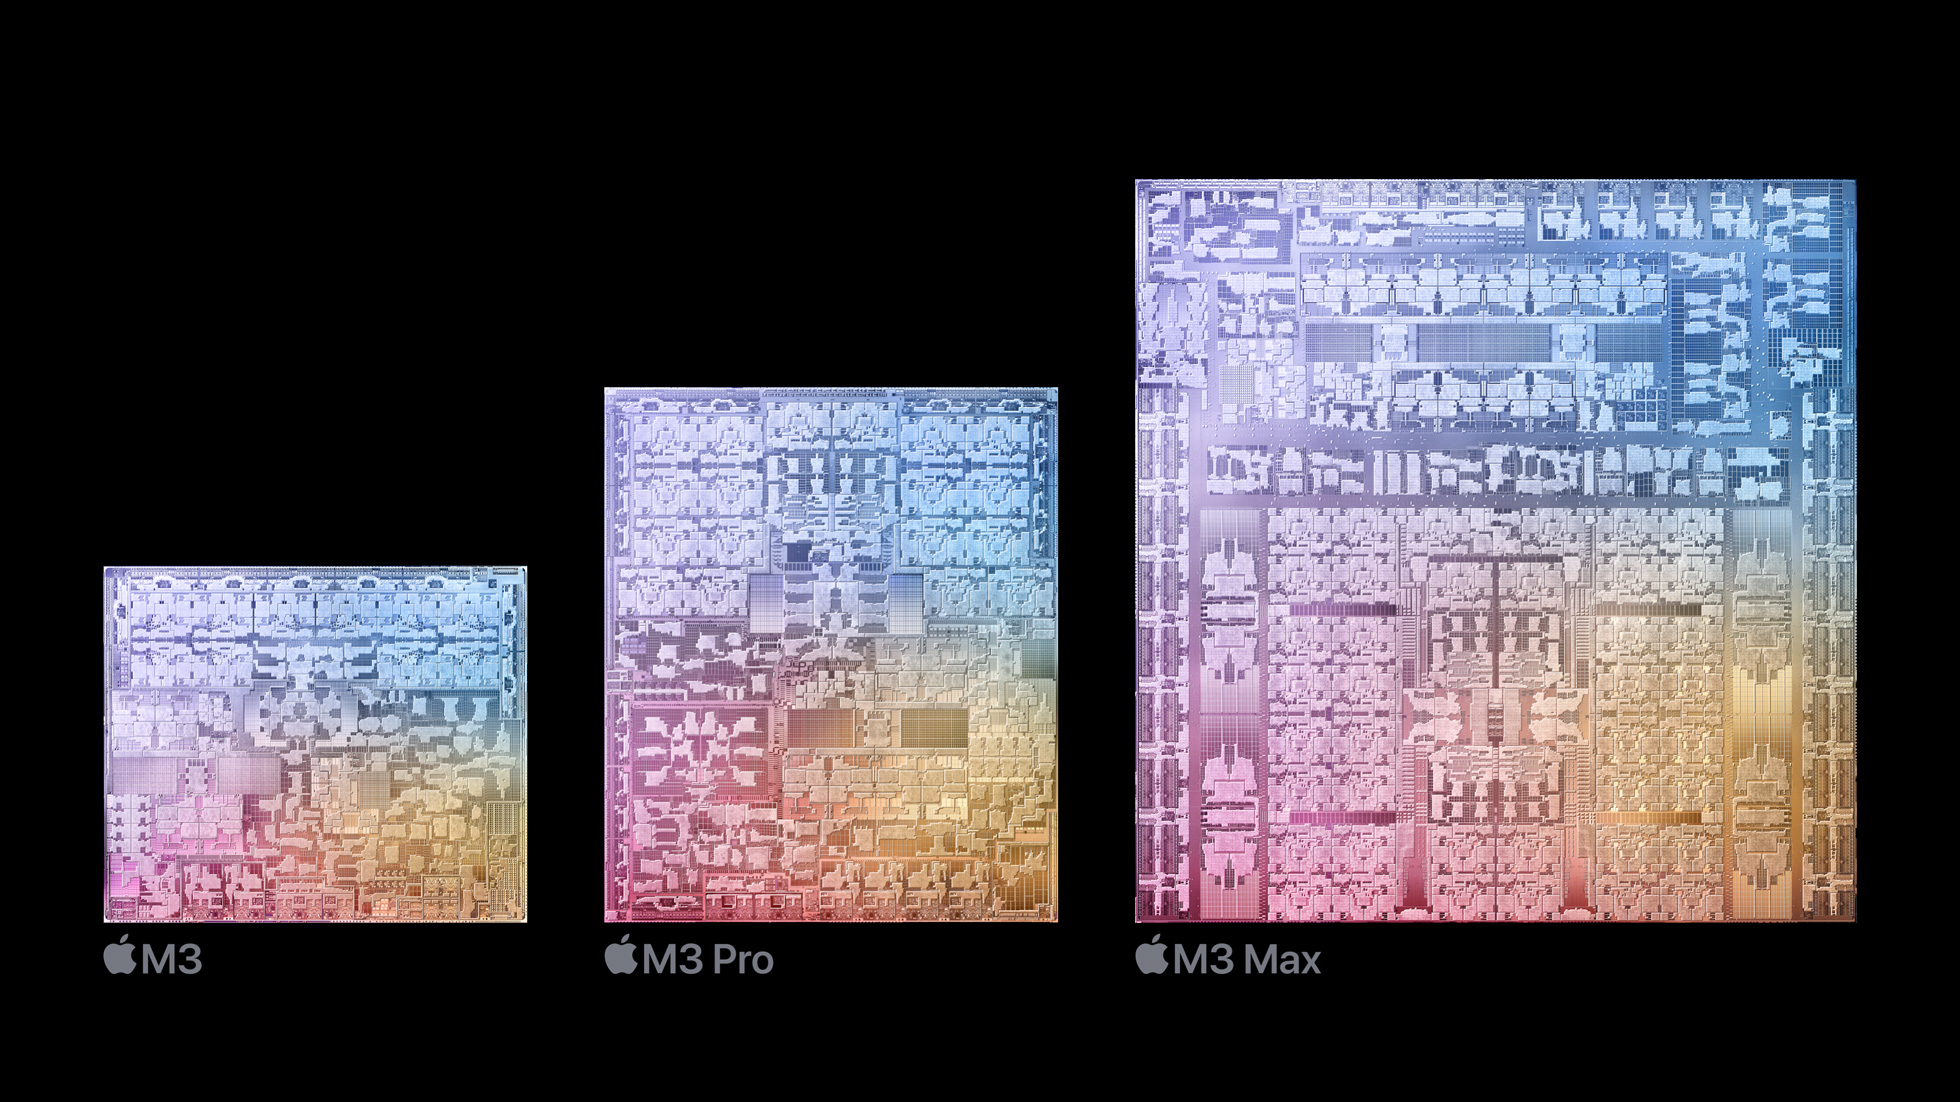 Apple M3 chip series architecture 231030 - Newsshooter